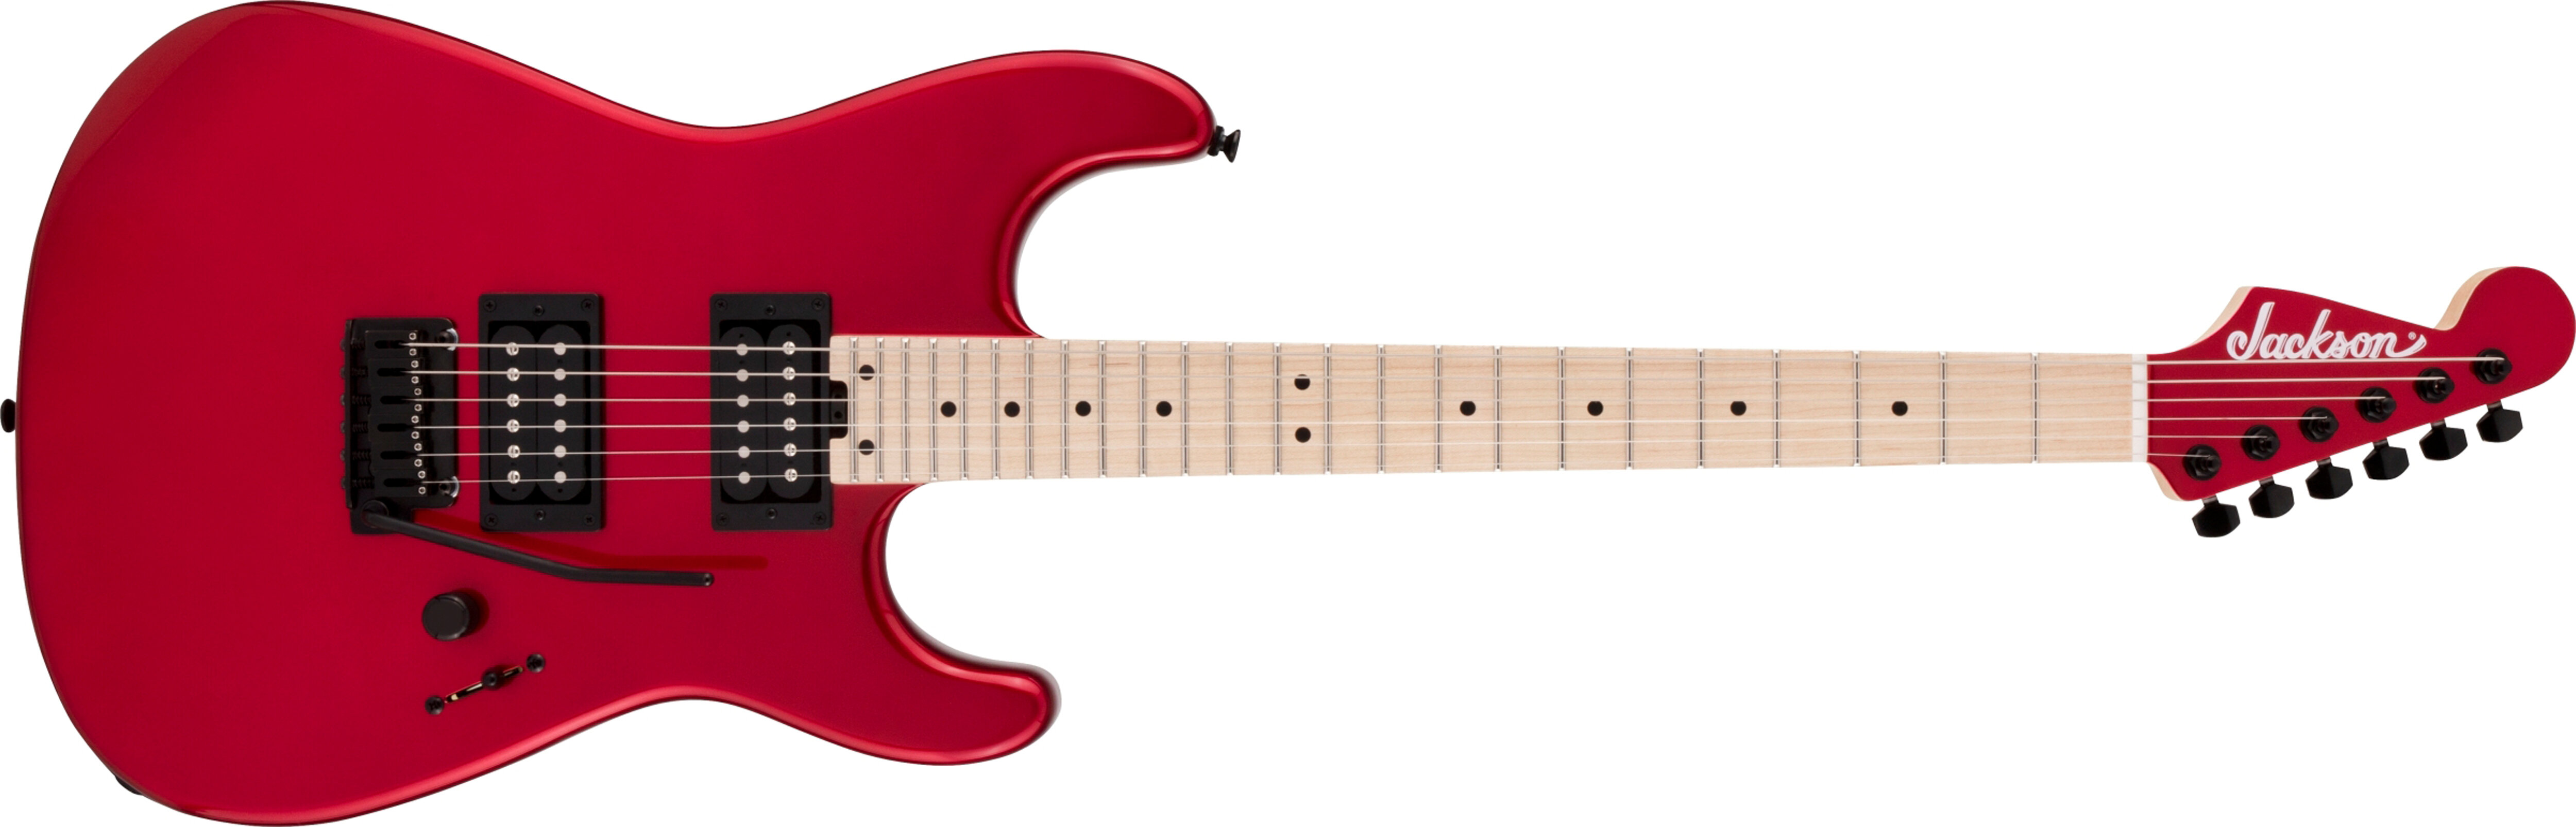 Jackson Pro SD1 Gus G Signature Candy Apple Red -  2918752509